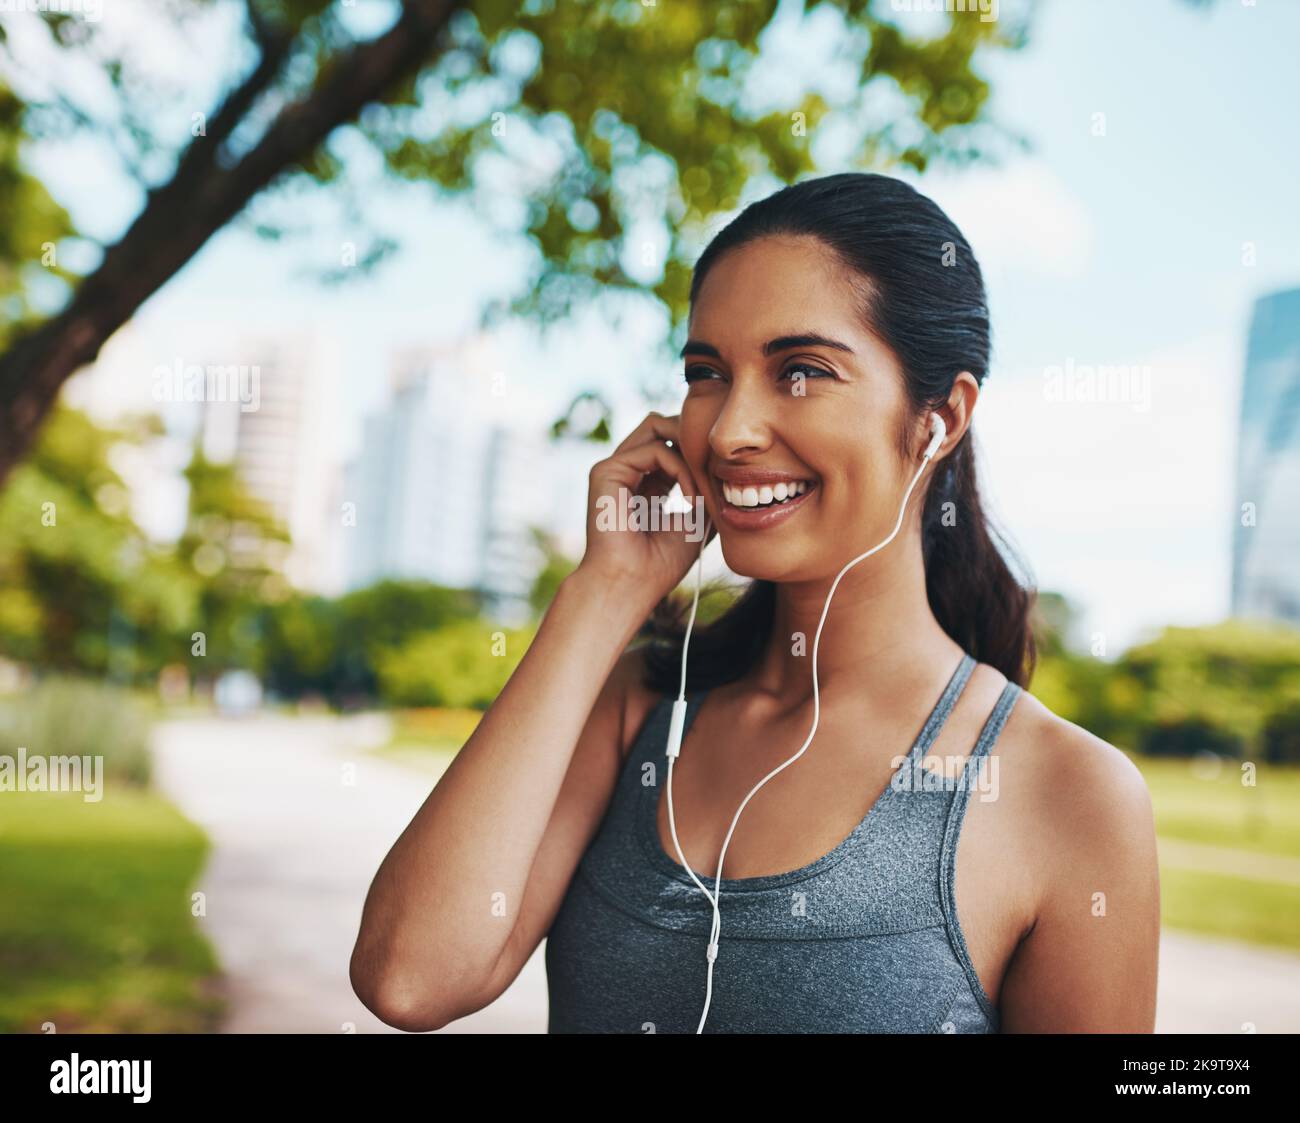 If music be the food of fitness...an attractive young sportswoman listening to music while working out outdoors in the city. Stock Photo